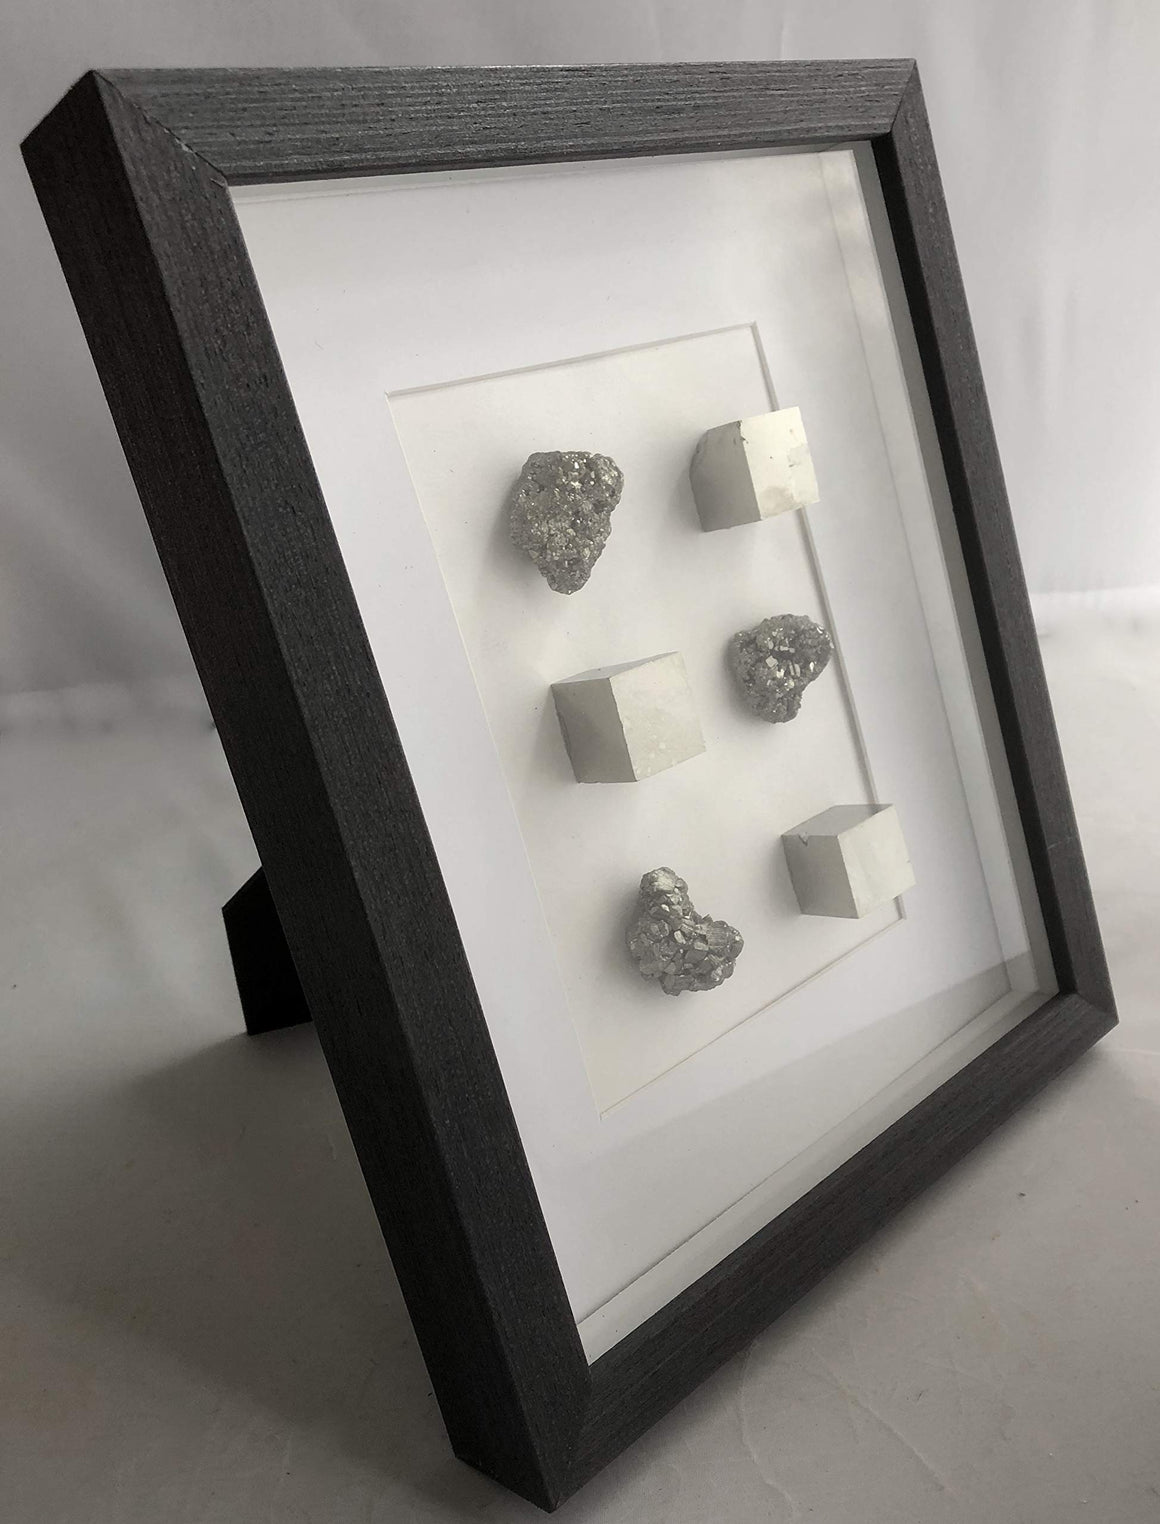 Spanish Pyrite Cube and Crystal Framed Art in Shadow Box - 8" x 11"